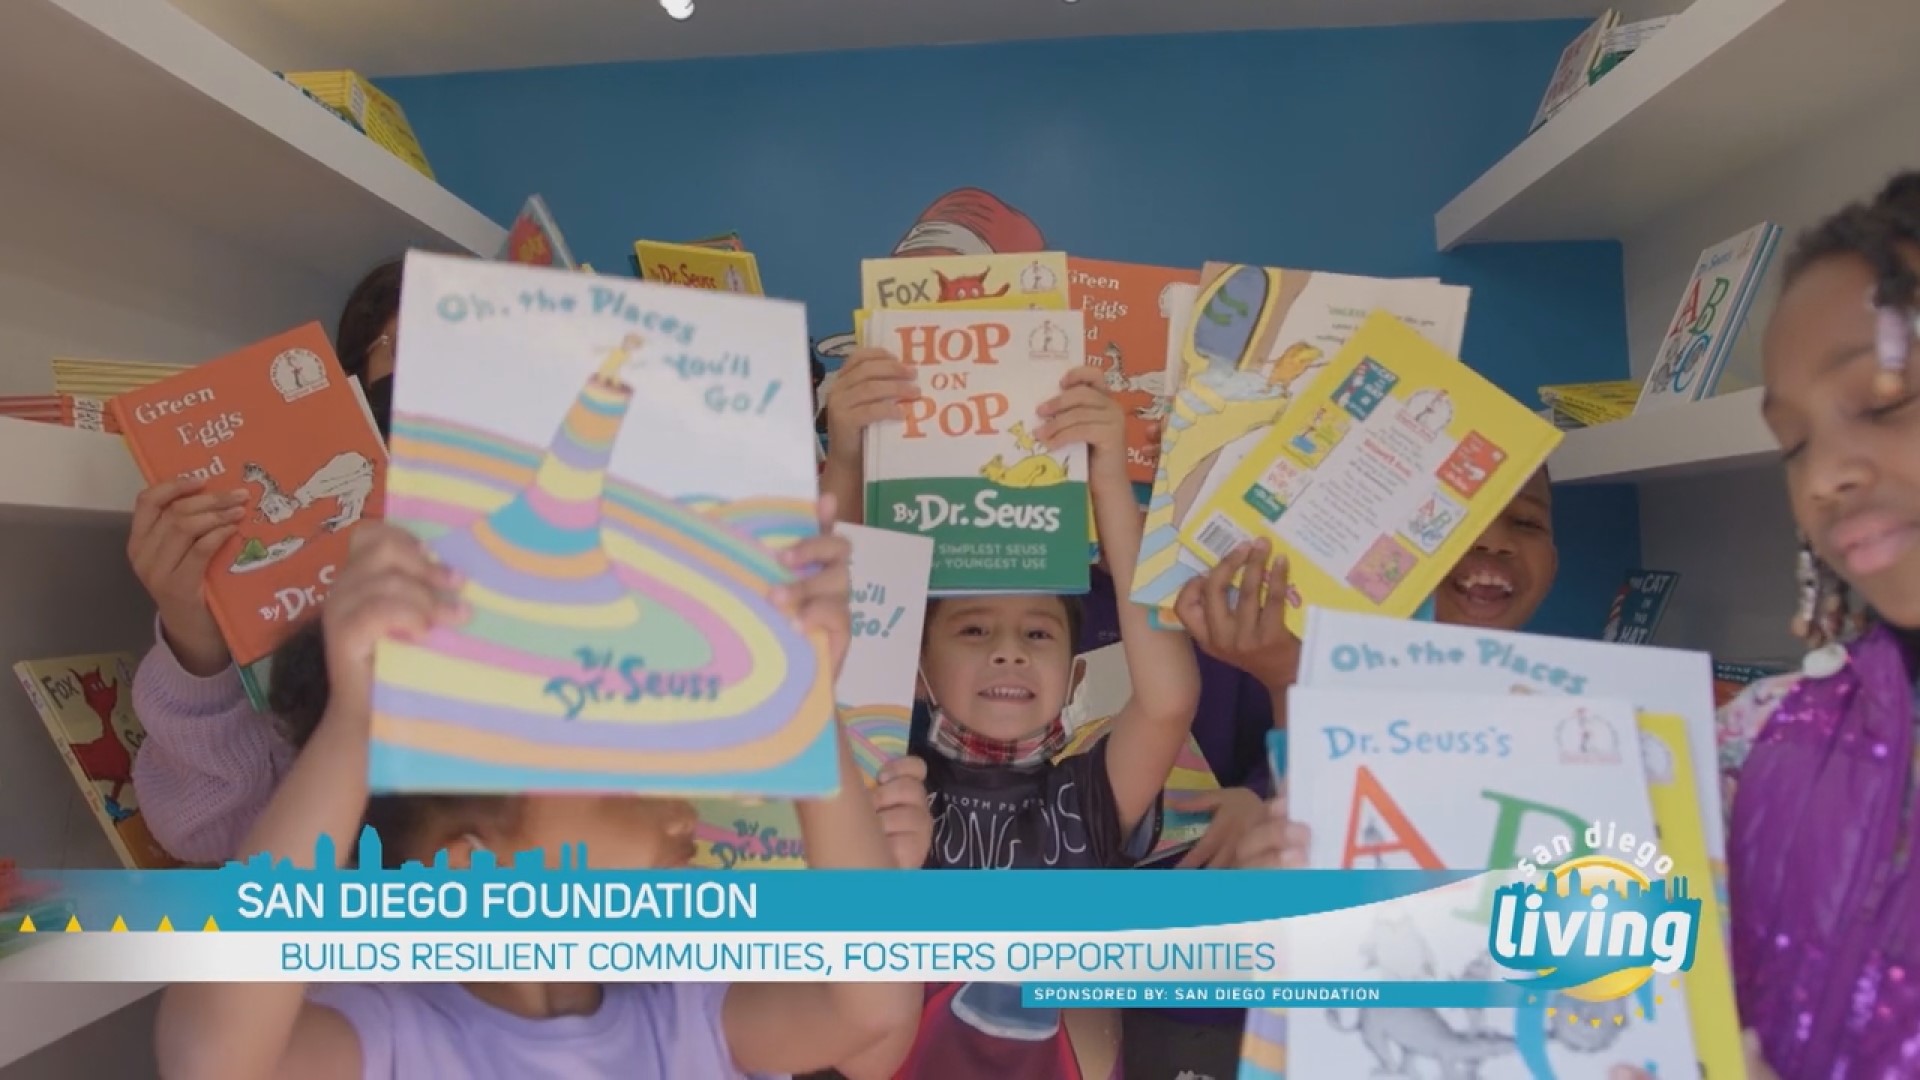 San Diego Foundation, Dr. Seuss Foundation Invest in Building Stronger Communities. Sponsored by: San Diego Foundation